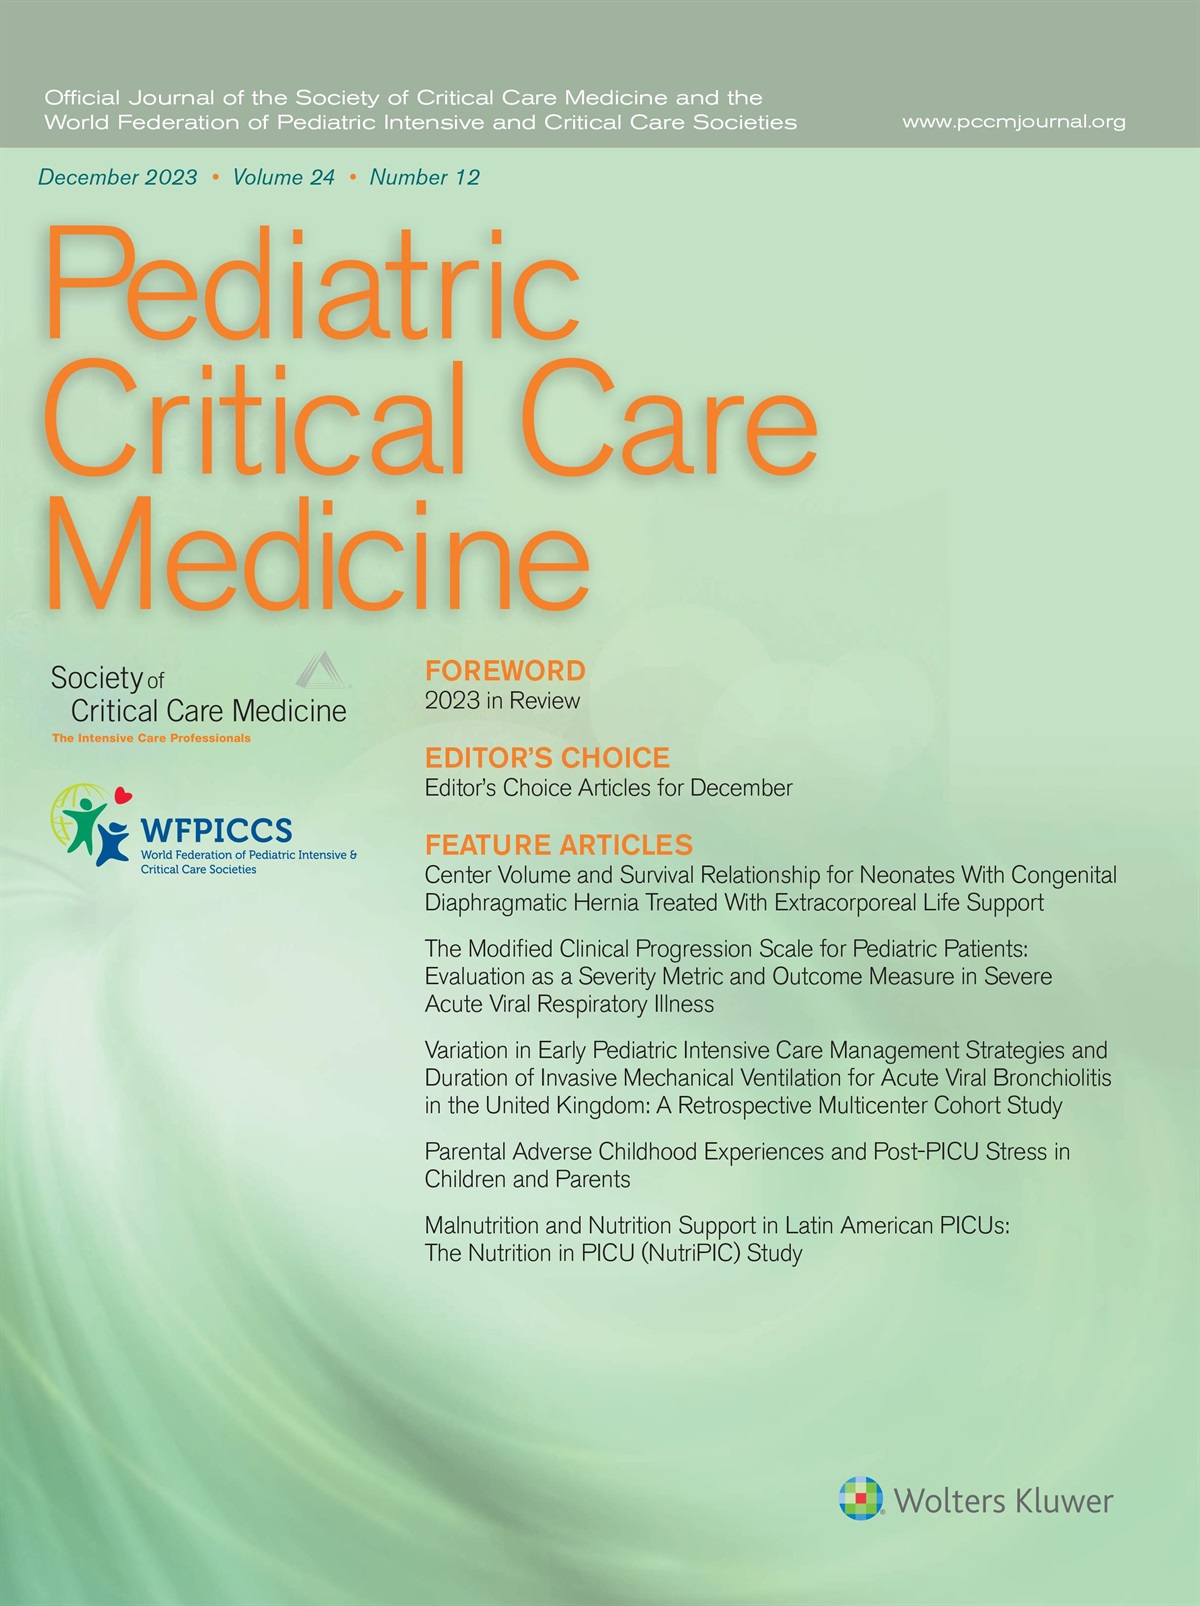 Mitigating Post-Intensive Care Syndrome: Time to Consider Embedded Pediatric Psychologists in PICUs*